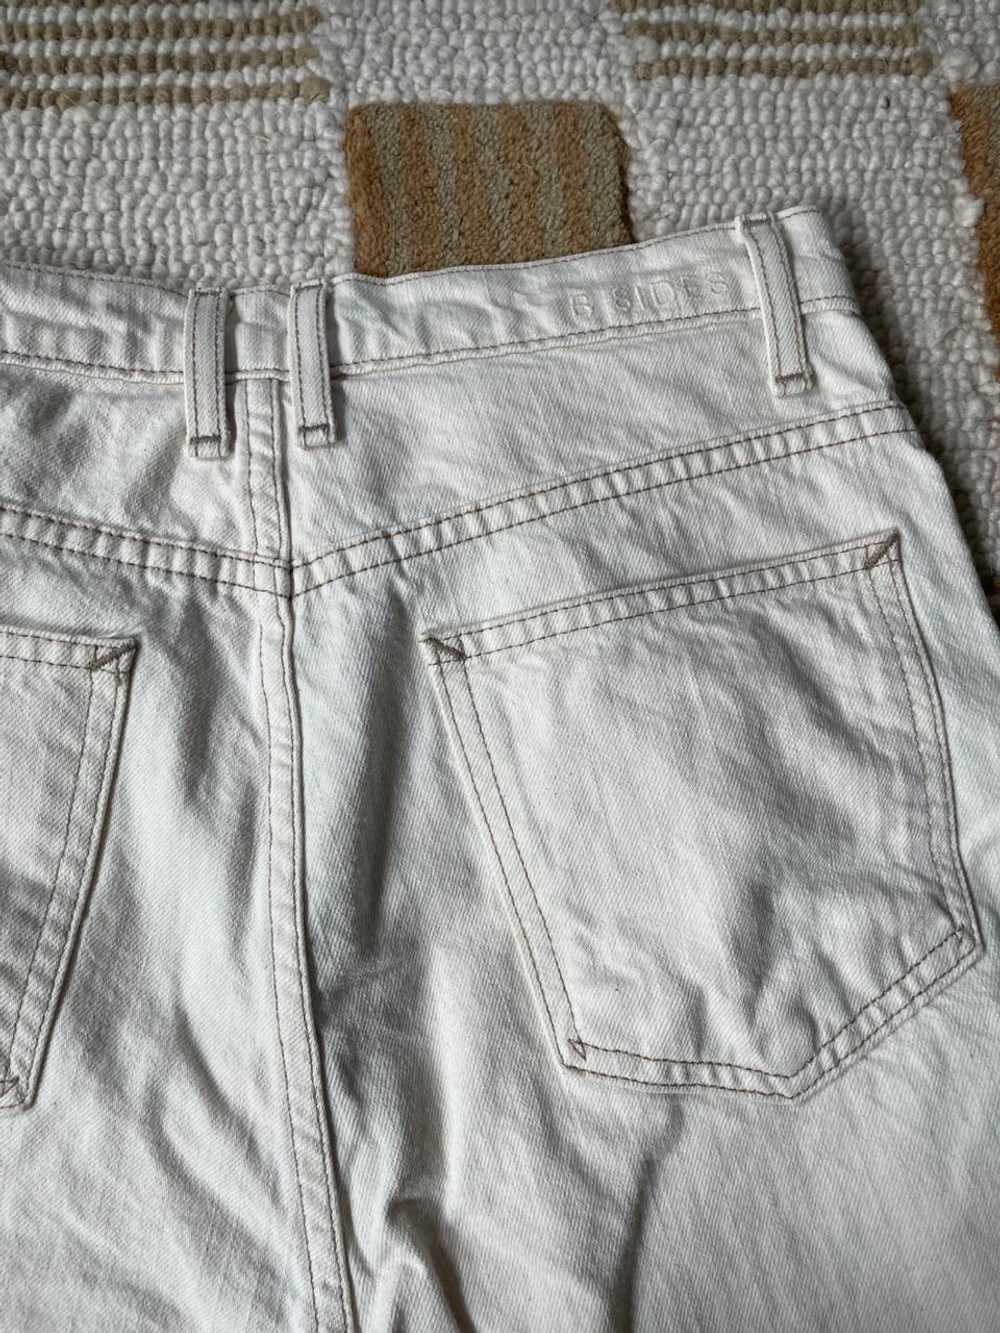 B SIDES Jeans Plein Jeans (27) | Used, Secondhand… - image 4